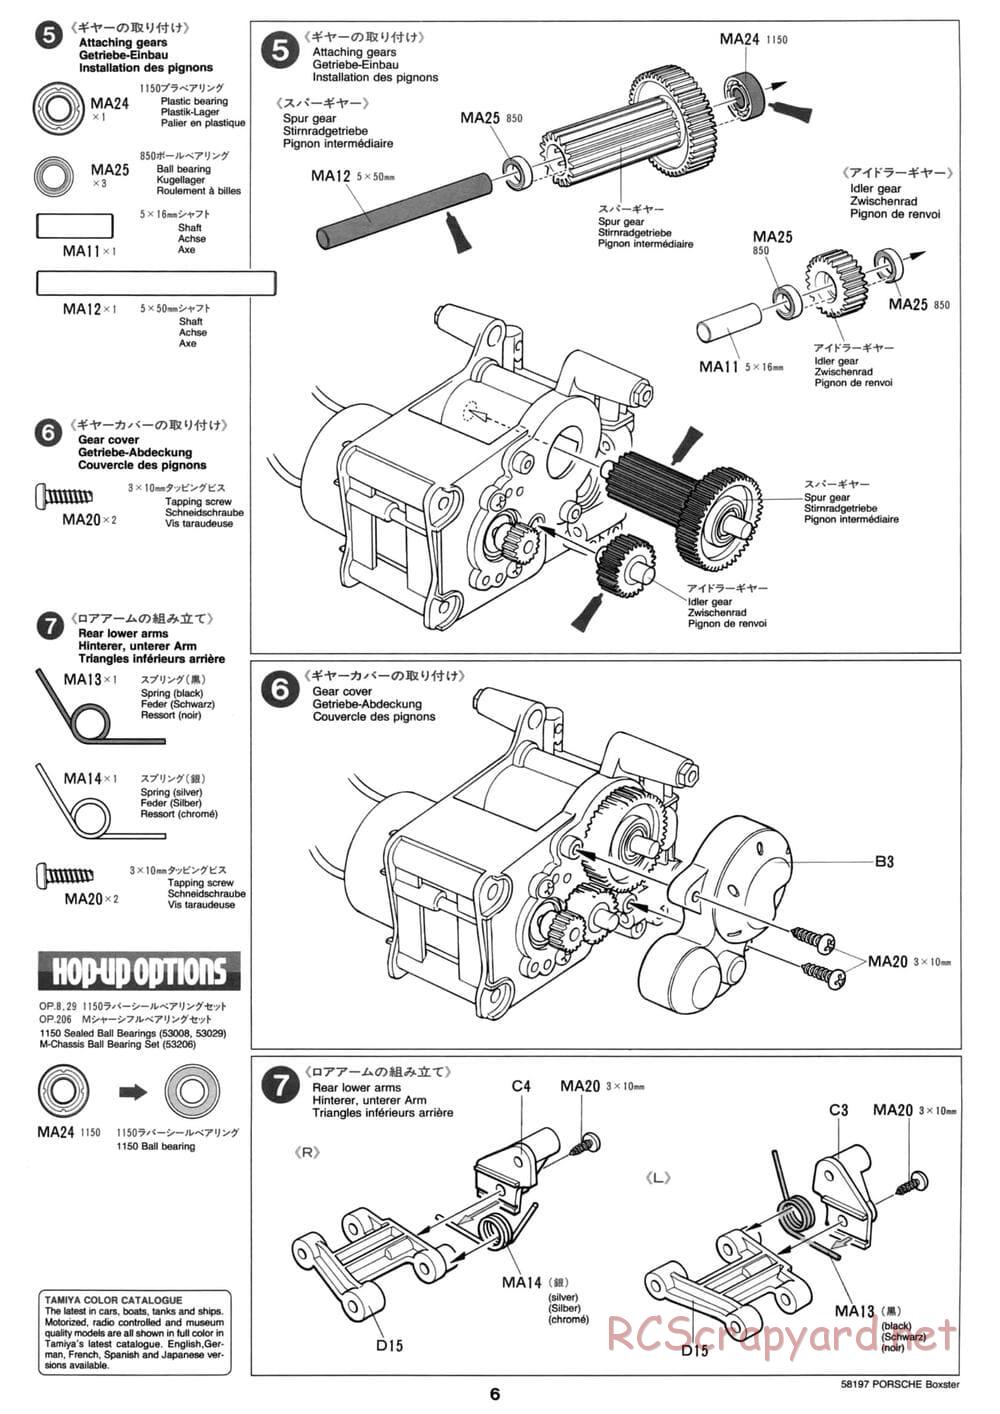 Tamiya - Porsche Boxster - M02L Chassis - Manual - Page 6